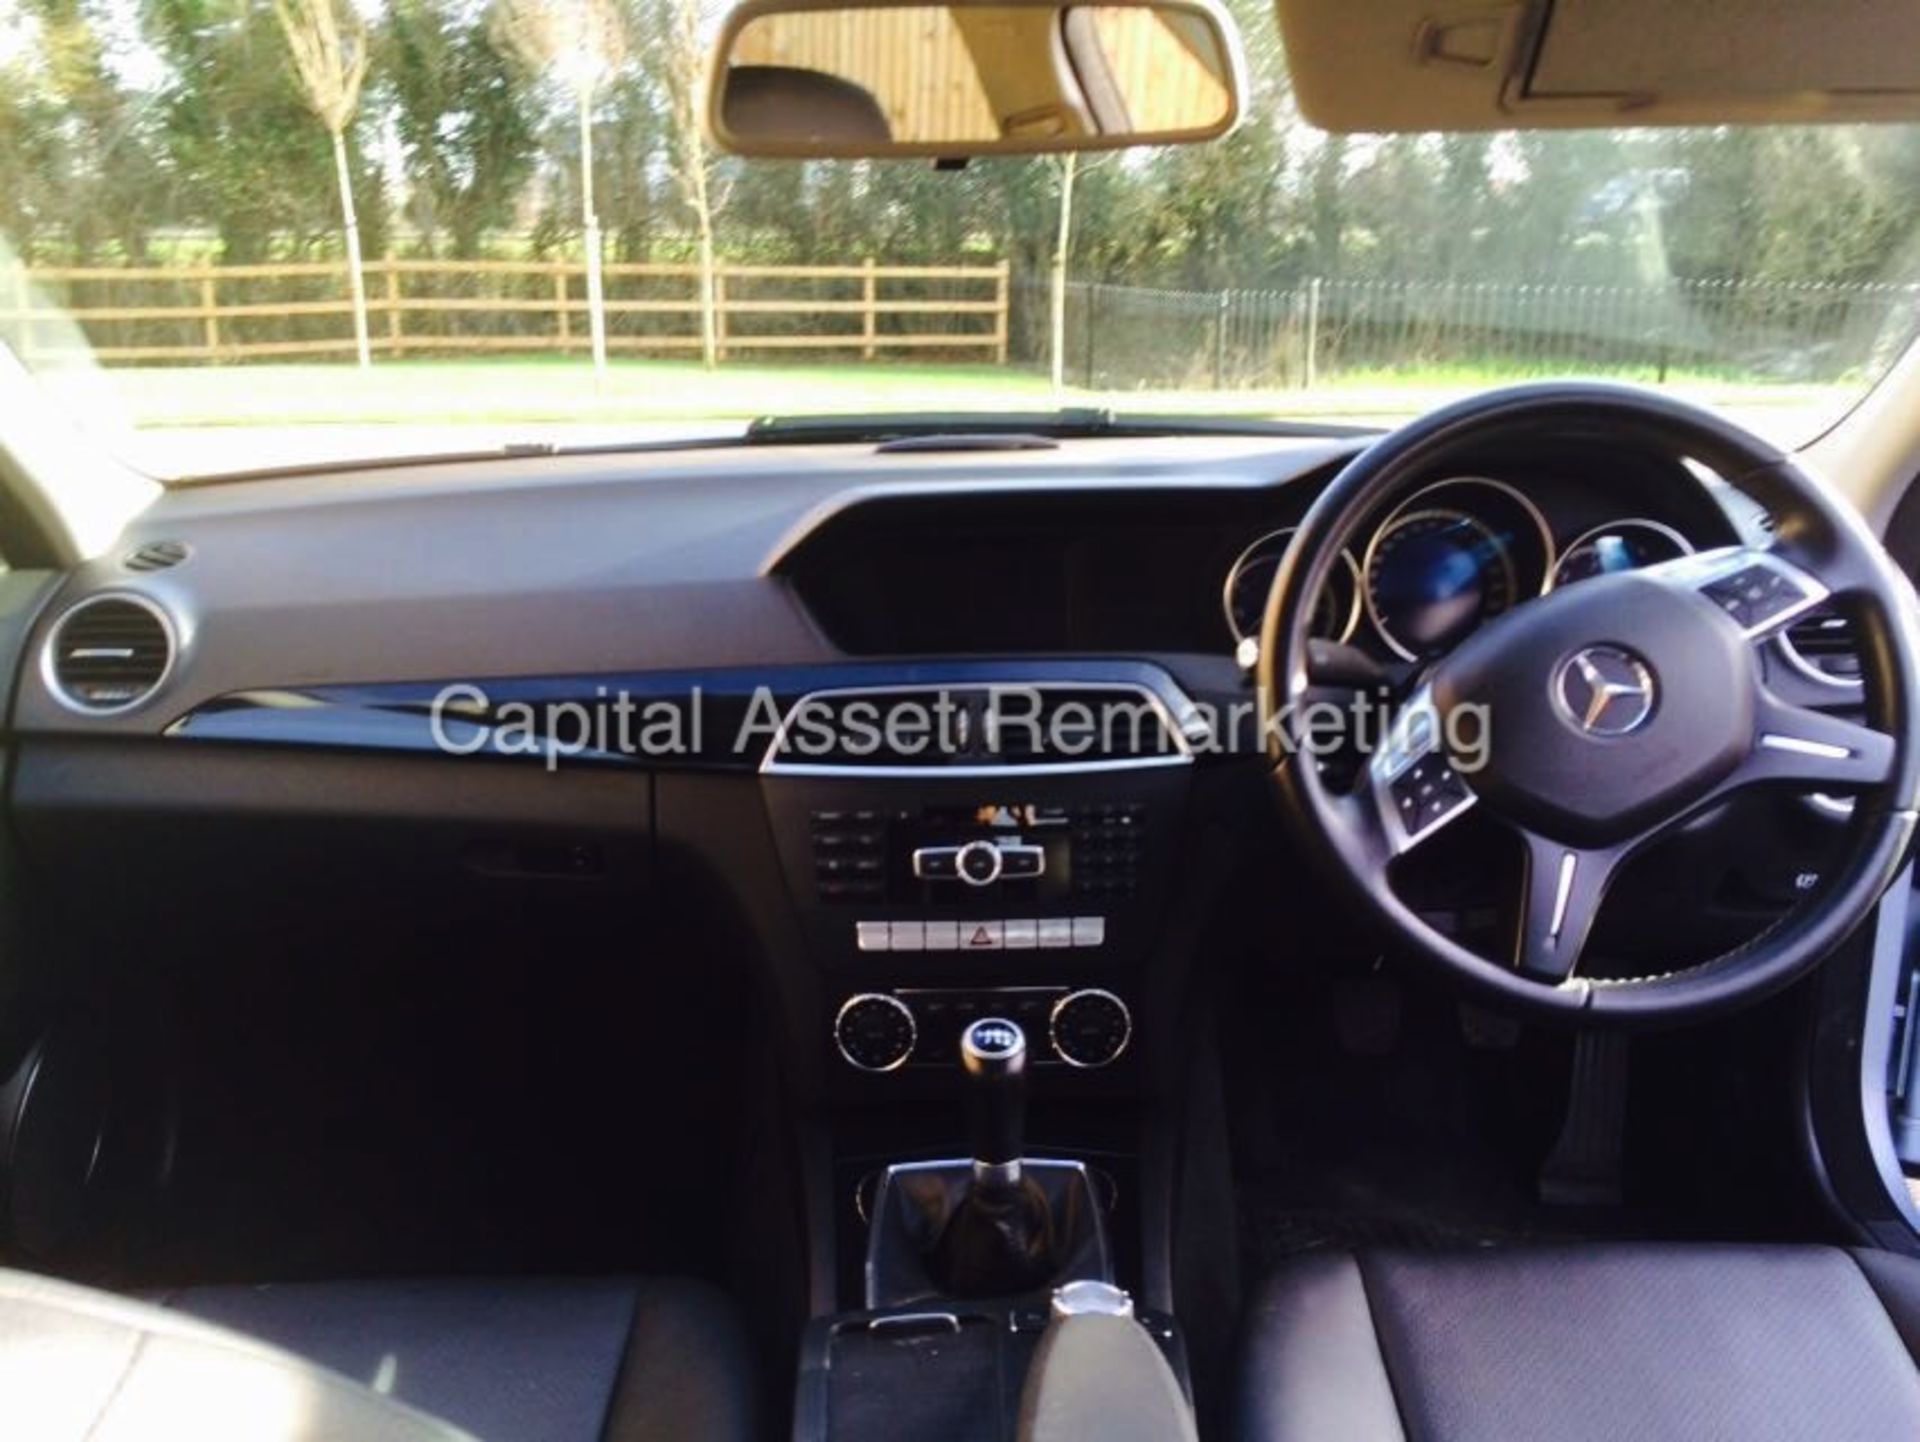 ON SALE MERCEDES C220CDI "EXECUTIVE SE" BLUE EFFINCY ECO (2012 -12 REG) 1 OWNER FROM NEW - LEATHER - Image 11 of 16